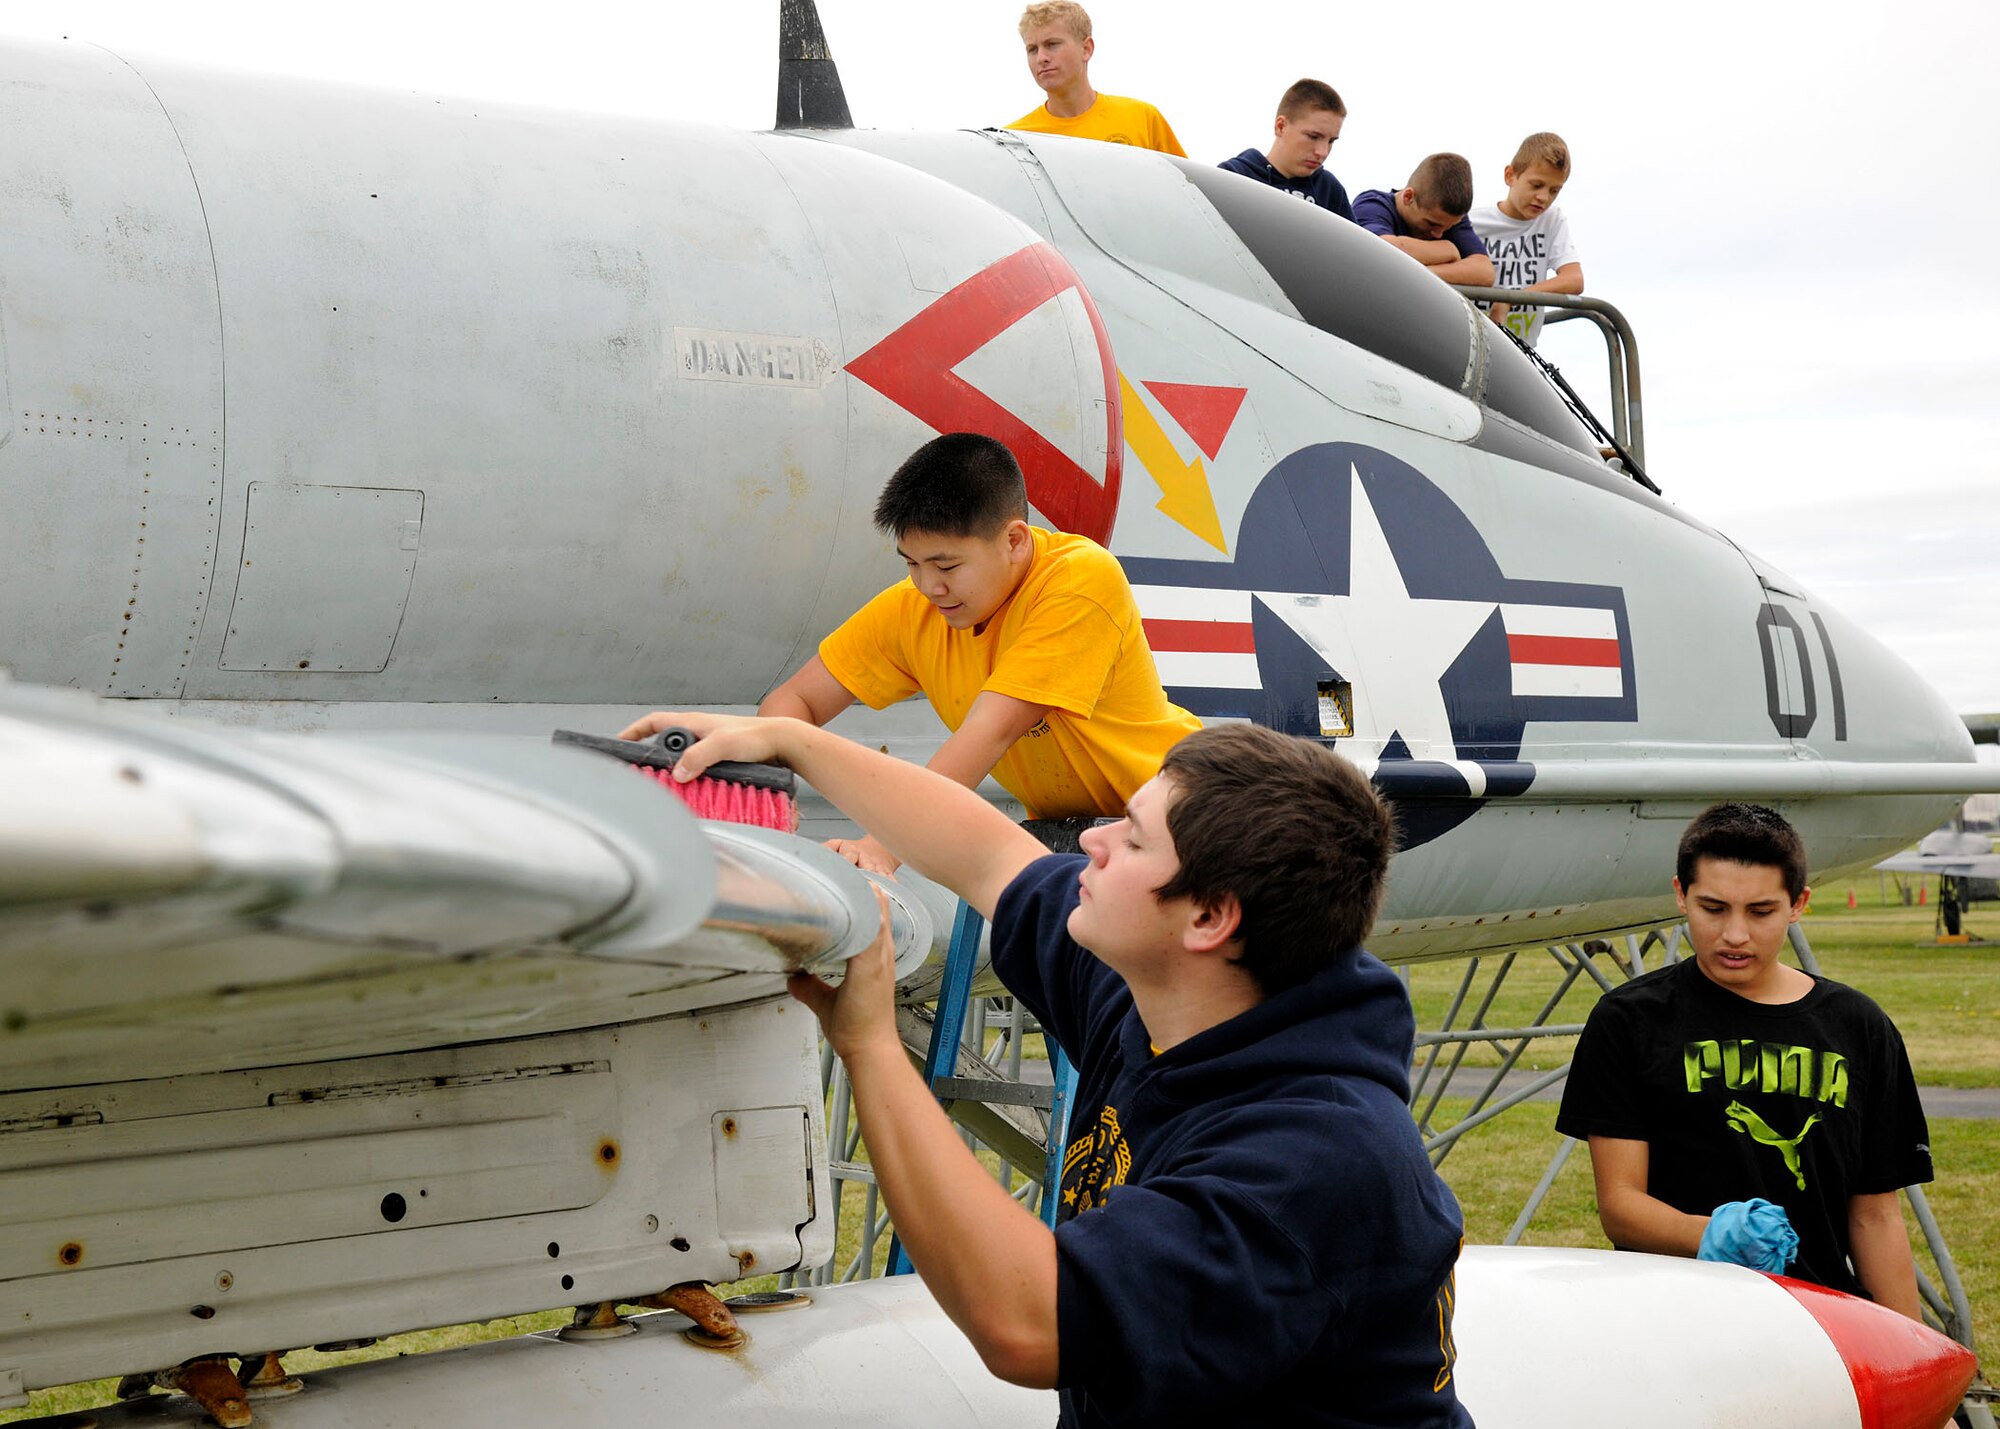 Sea Cadets from the Tomcat squadron, wash an A-4B Skyhawk at the Selfridge
Military Air Museum on Selfridge Air National Guard Base, Michigan, Sept.
27, 2015. The Tomcat squadron recently adopted the A-4B Skyhawk and helps
keep the aircraft in top shape. The Skyhawk is a single seat carrier-capable
attack aircraft developed for the United States Navy. The Skyhawk was
operated at Selfridge ANGB from 1969 to 1973. (U.S. Air National Guard photo
by Senior Airman Ryan Zeski/Released)
